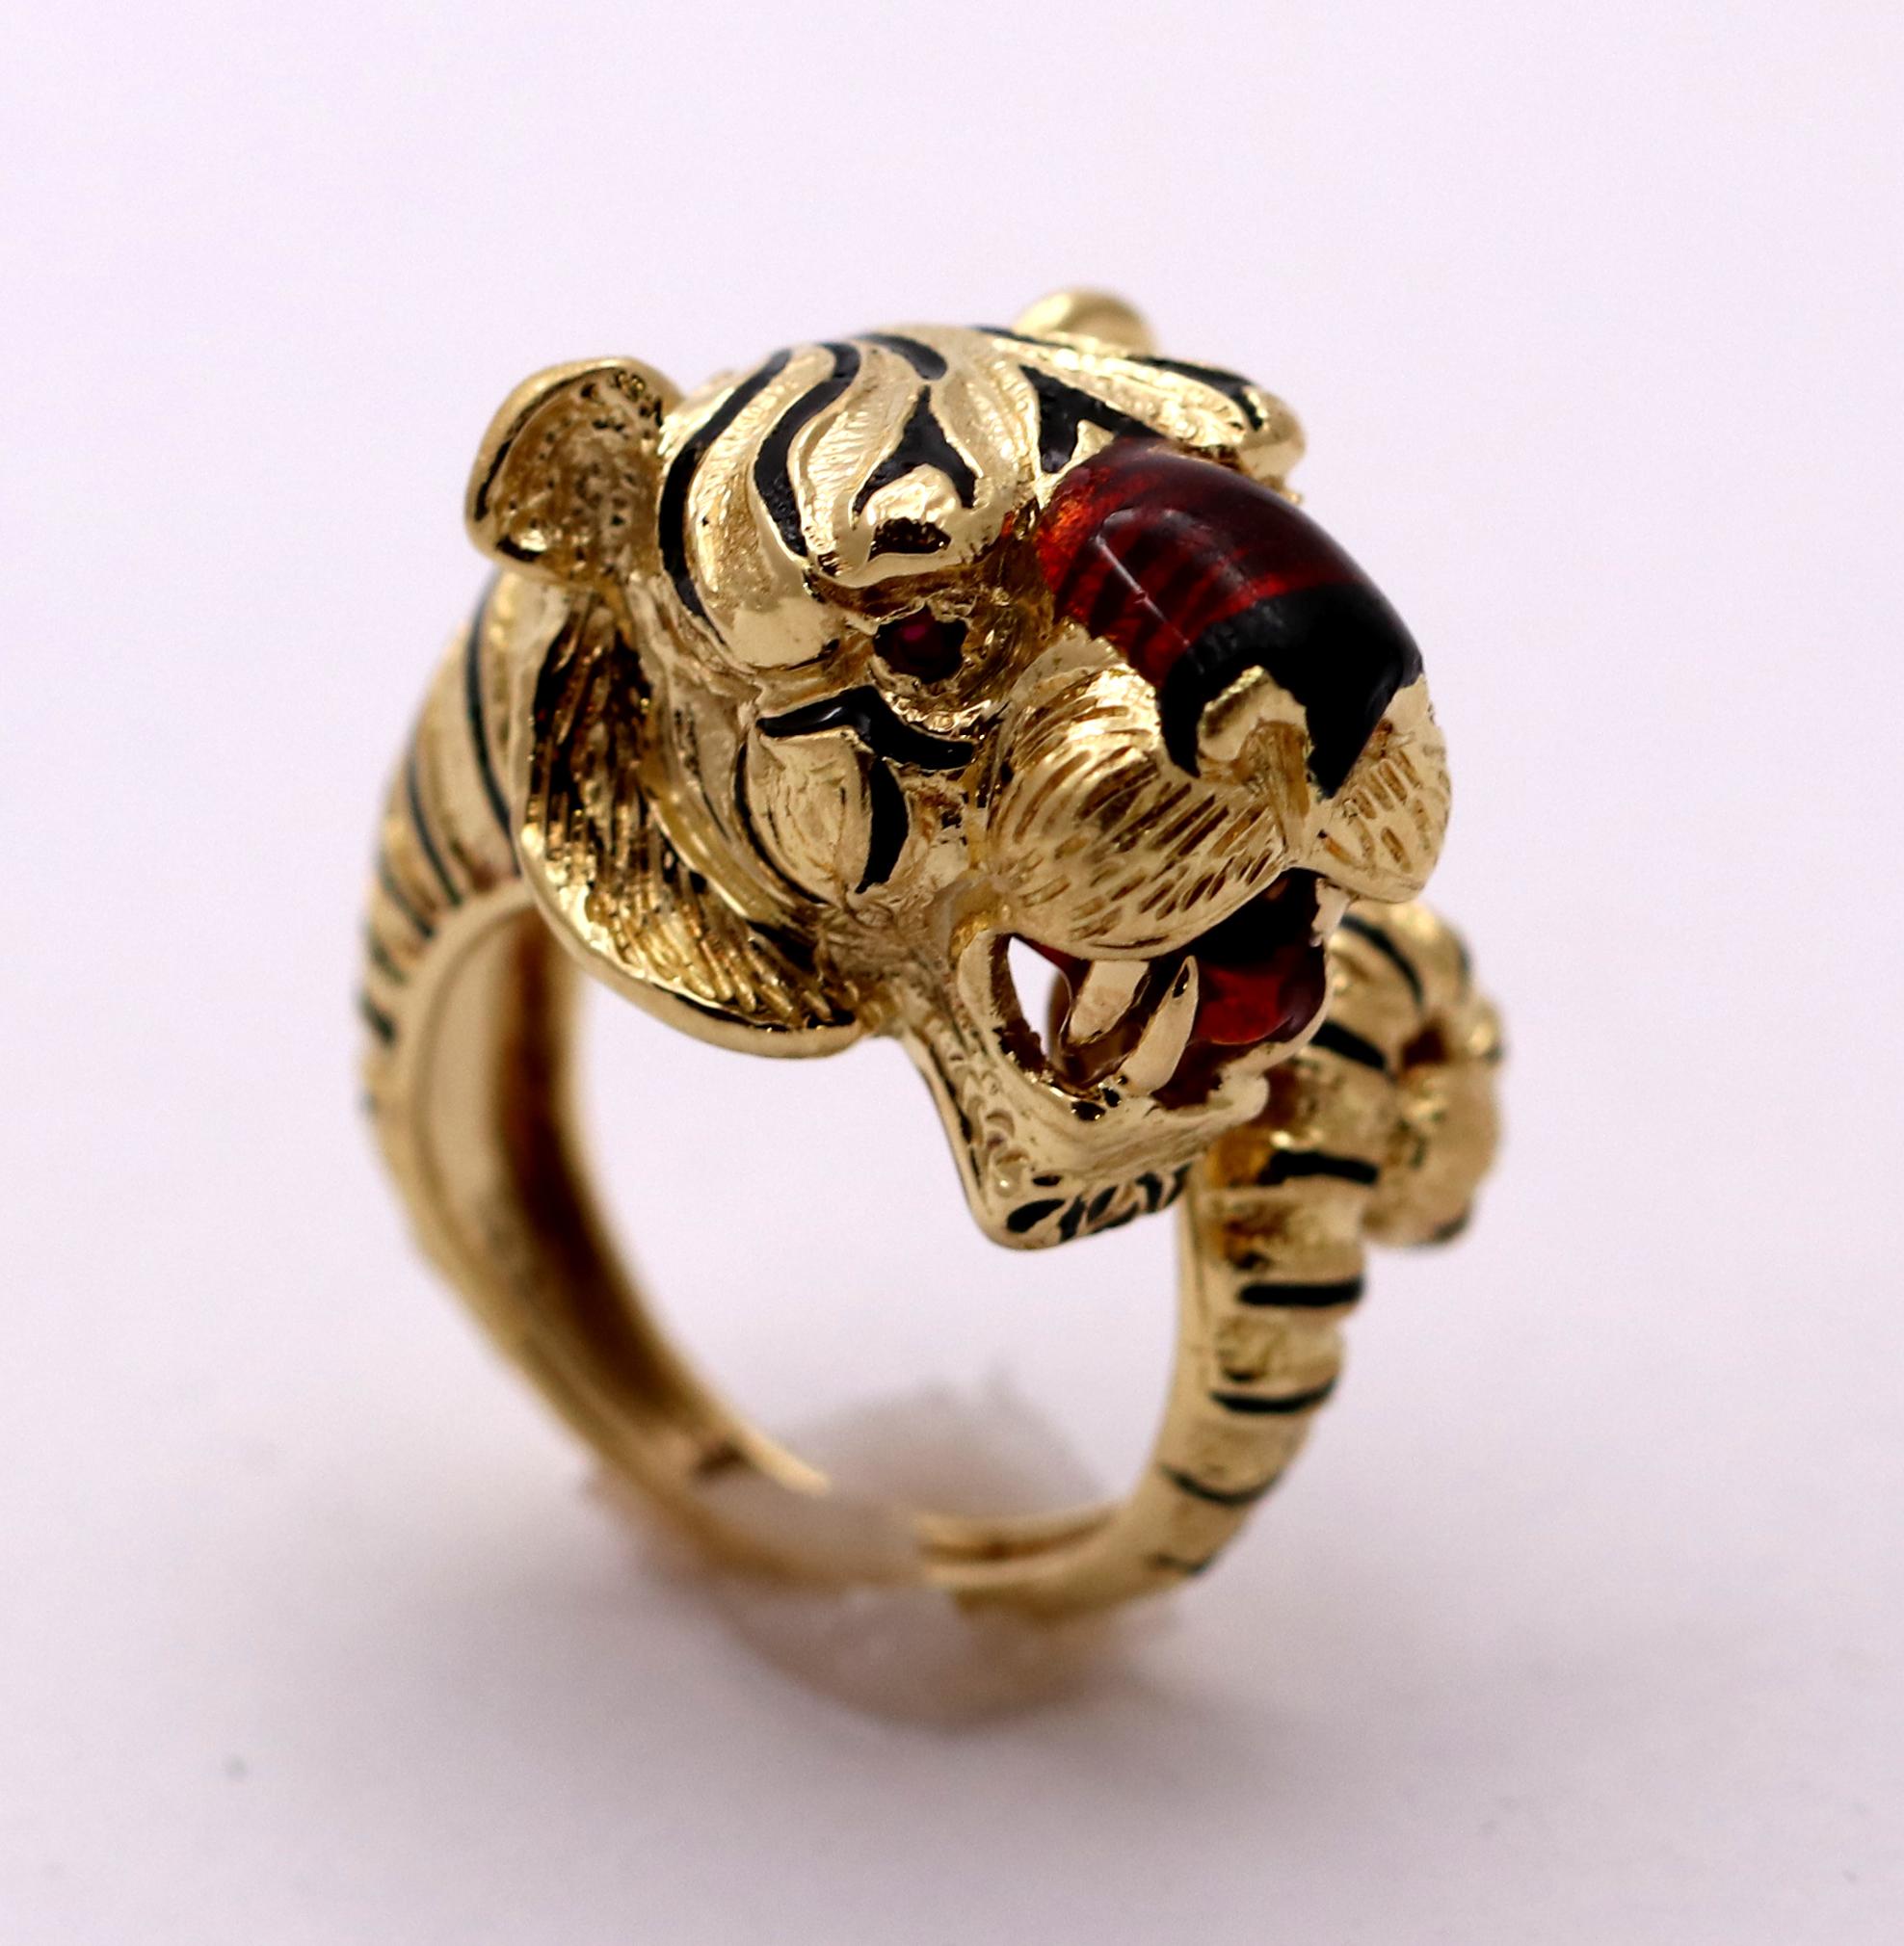 Women's Frascarolo Gold and Enamel Tiger Ring with Ruby Eyes